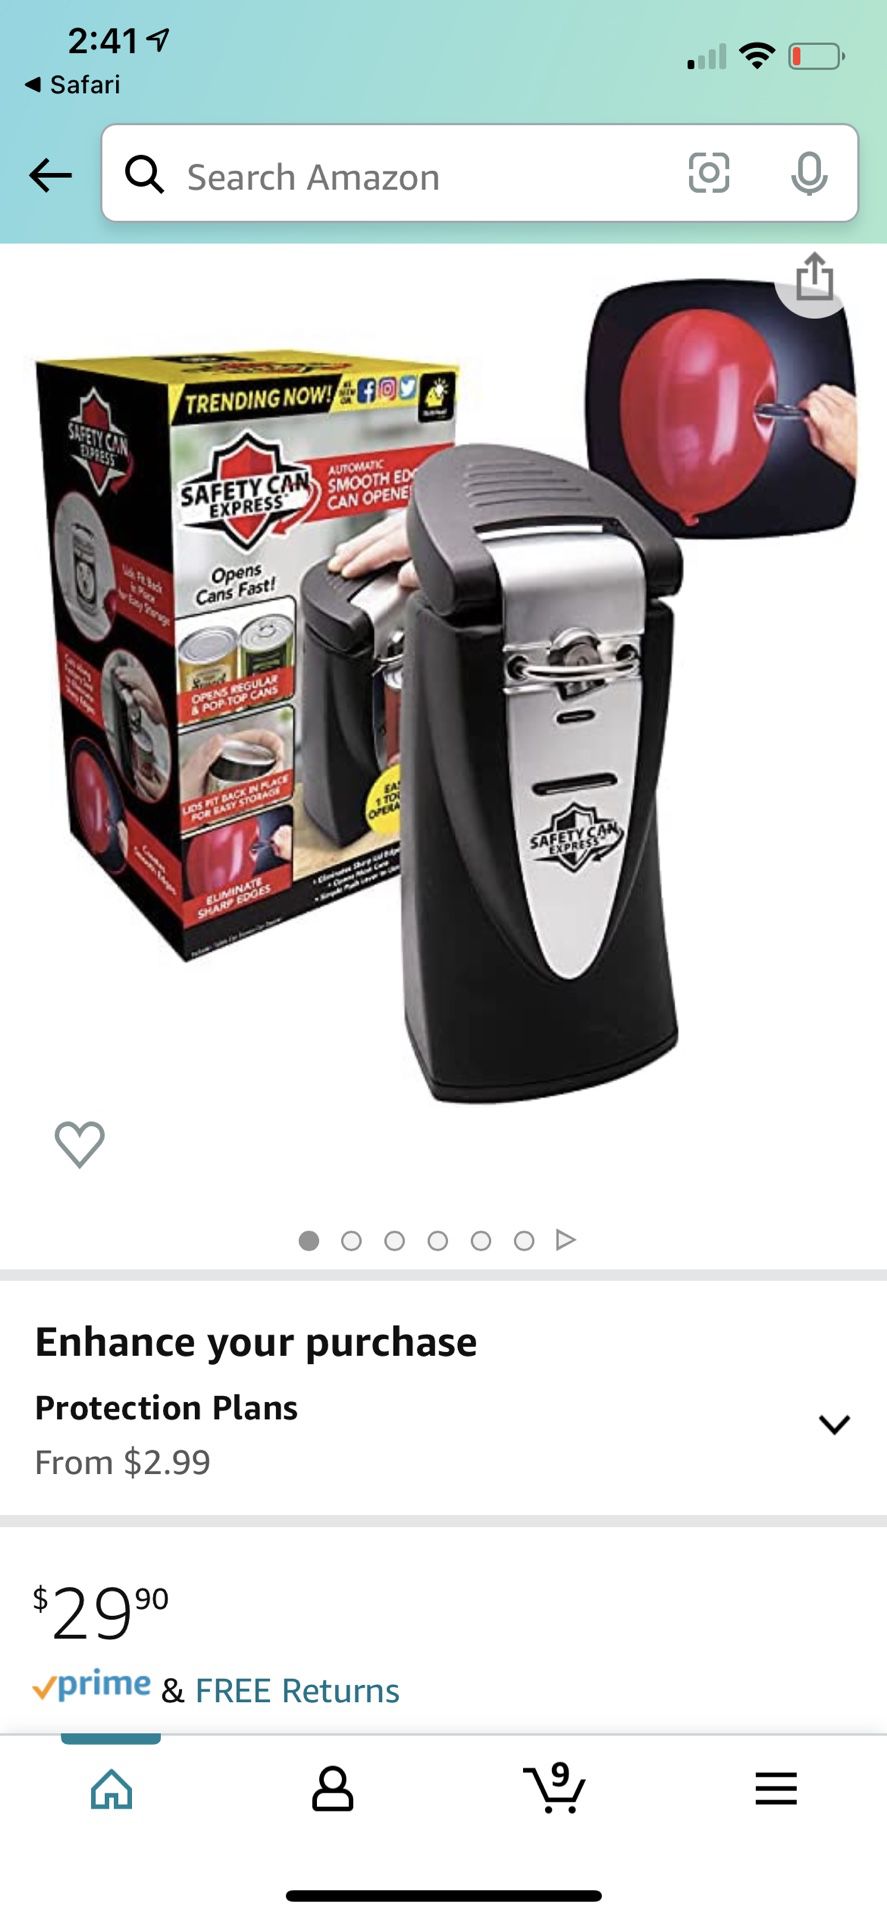 Bella Electrical Extra Tall Can Opener Red for Sale in Compton, CA - OfferUp